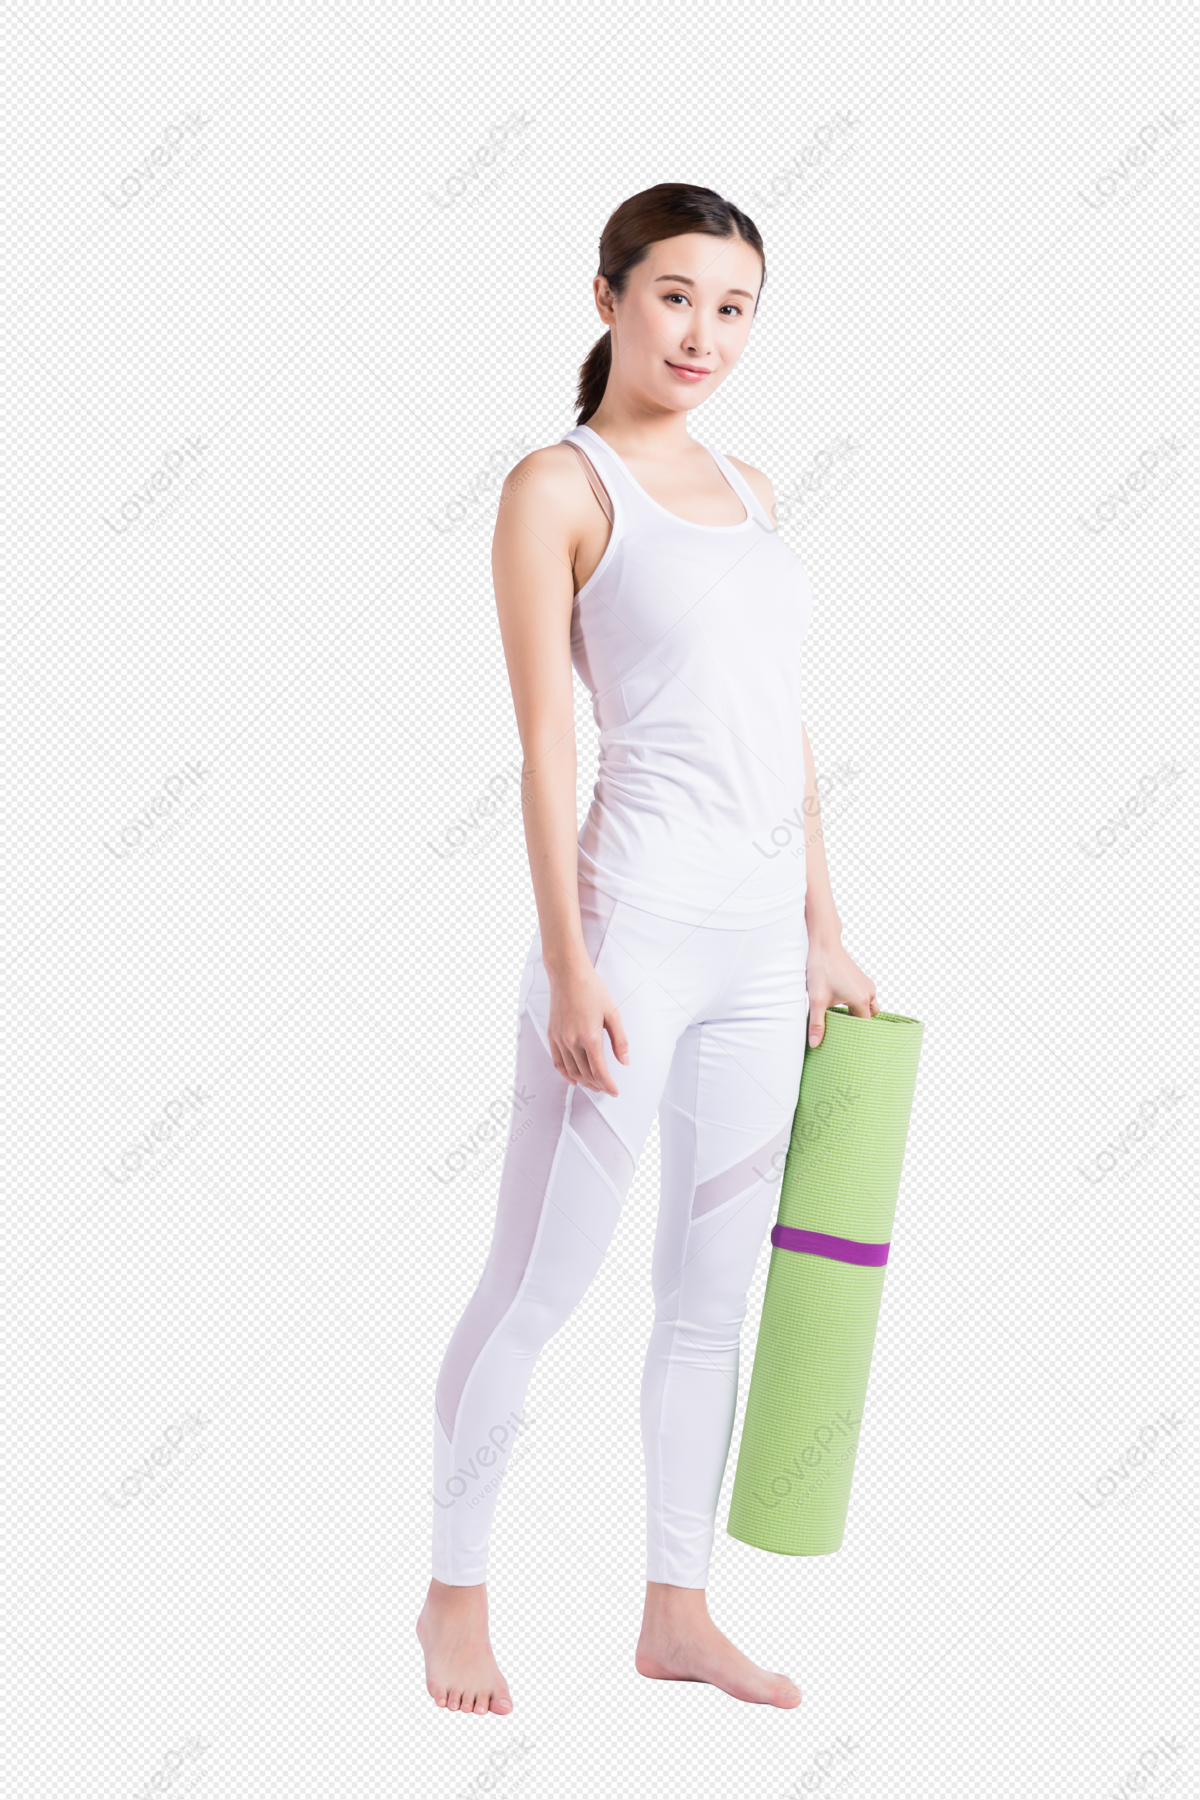 Young Women With Yoga Mats, Woman Yoga, Light White, Green White PNG  Picture And Clipart Image For Free Download - Lovepik